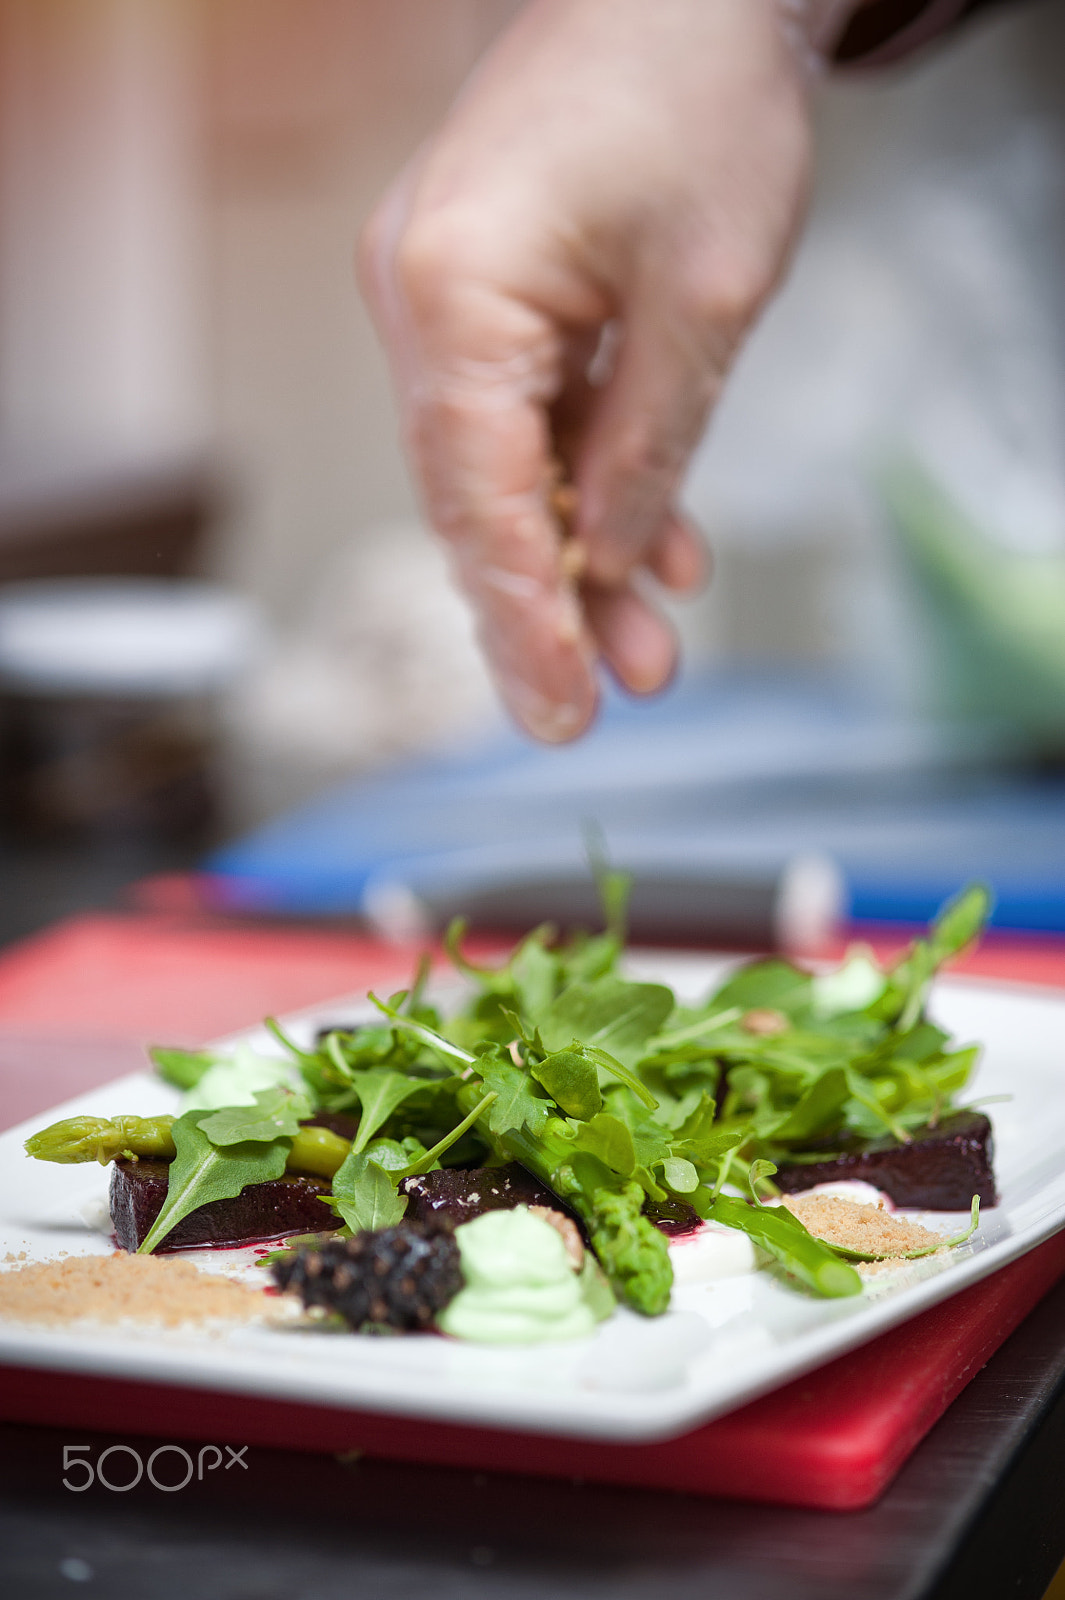 Nikon D700 + AF Micro-Nikkor 105mm f/2.8 sample photo. Male chef cooking salad with arugula and beet photography